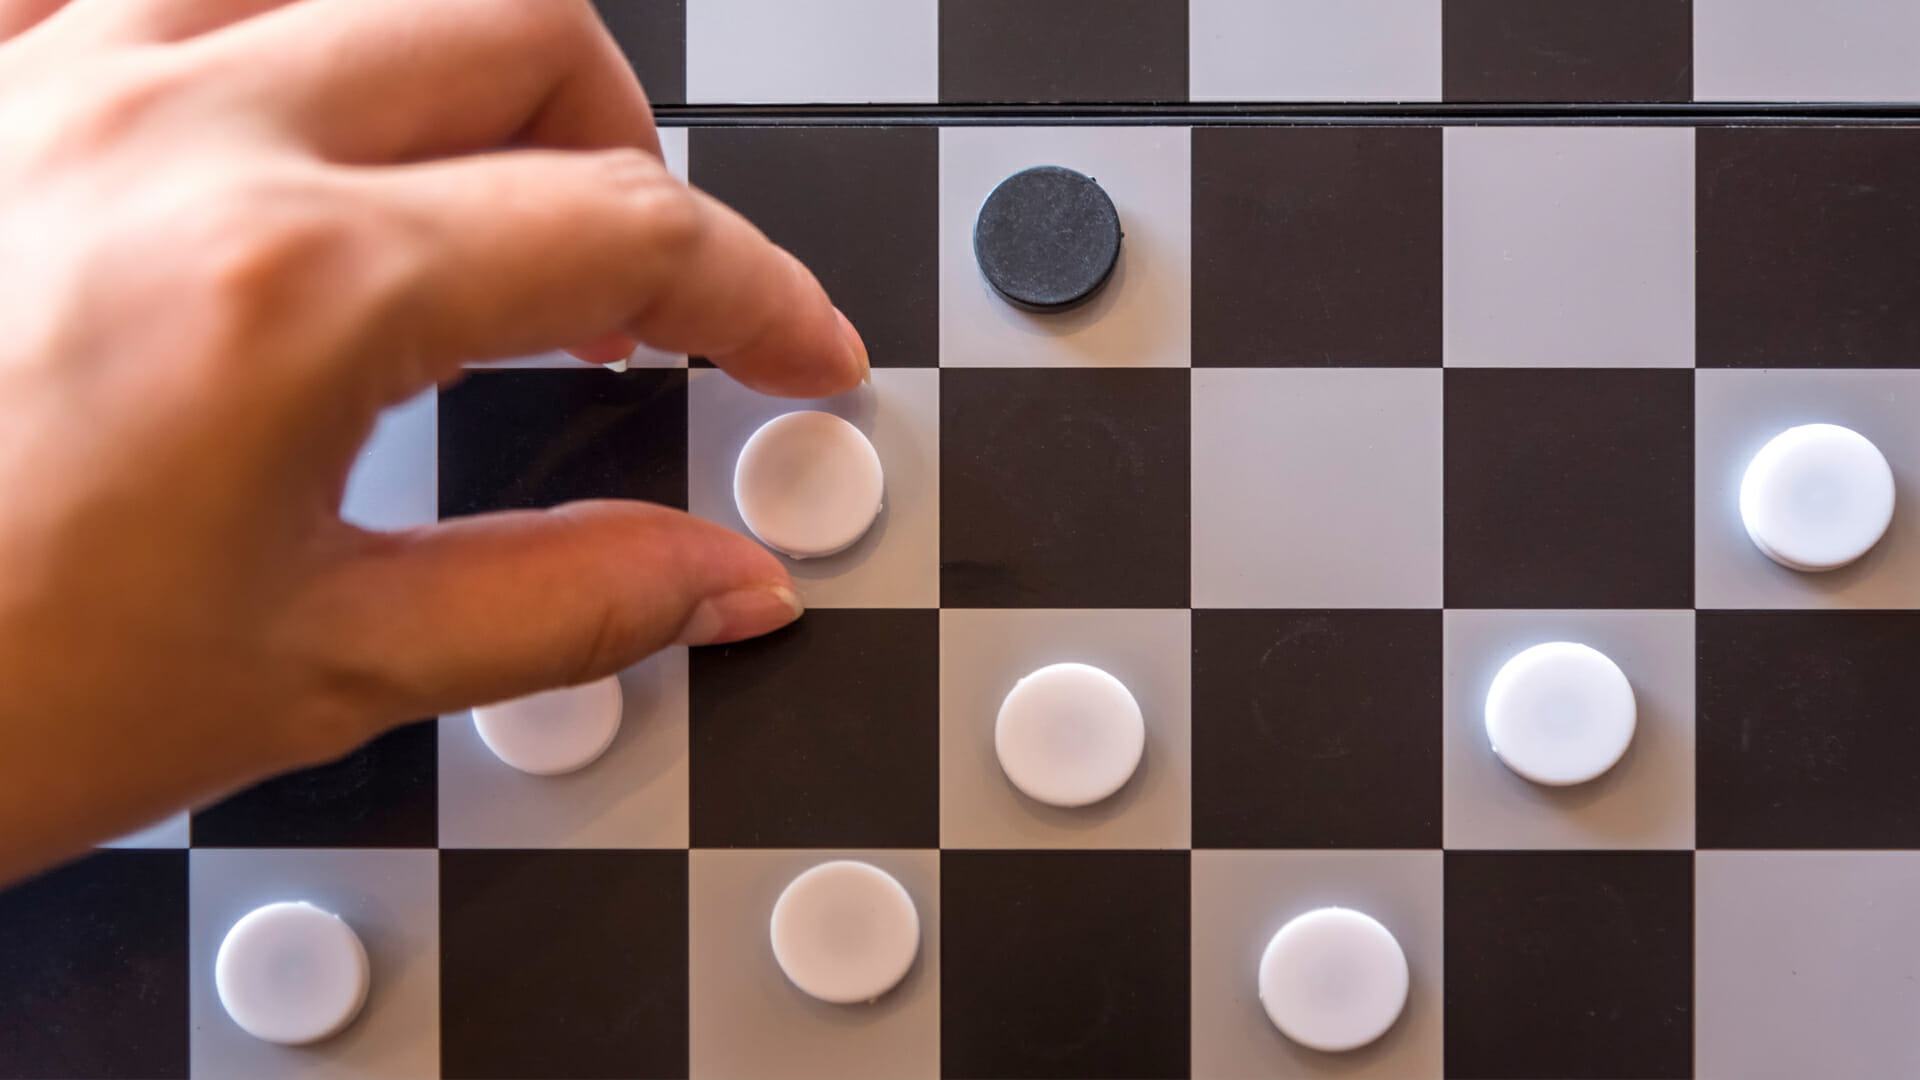 Mind-bending checker board optical illusion baffles the internet - so what do you see?